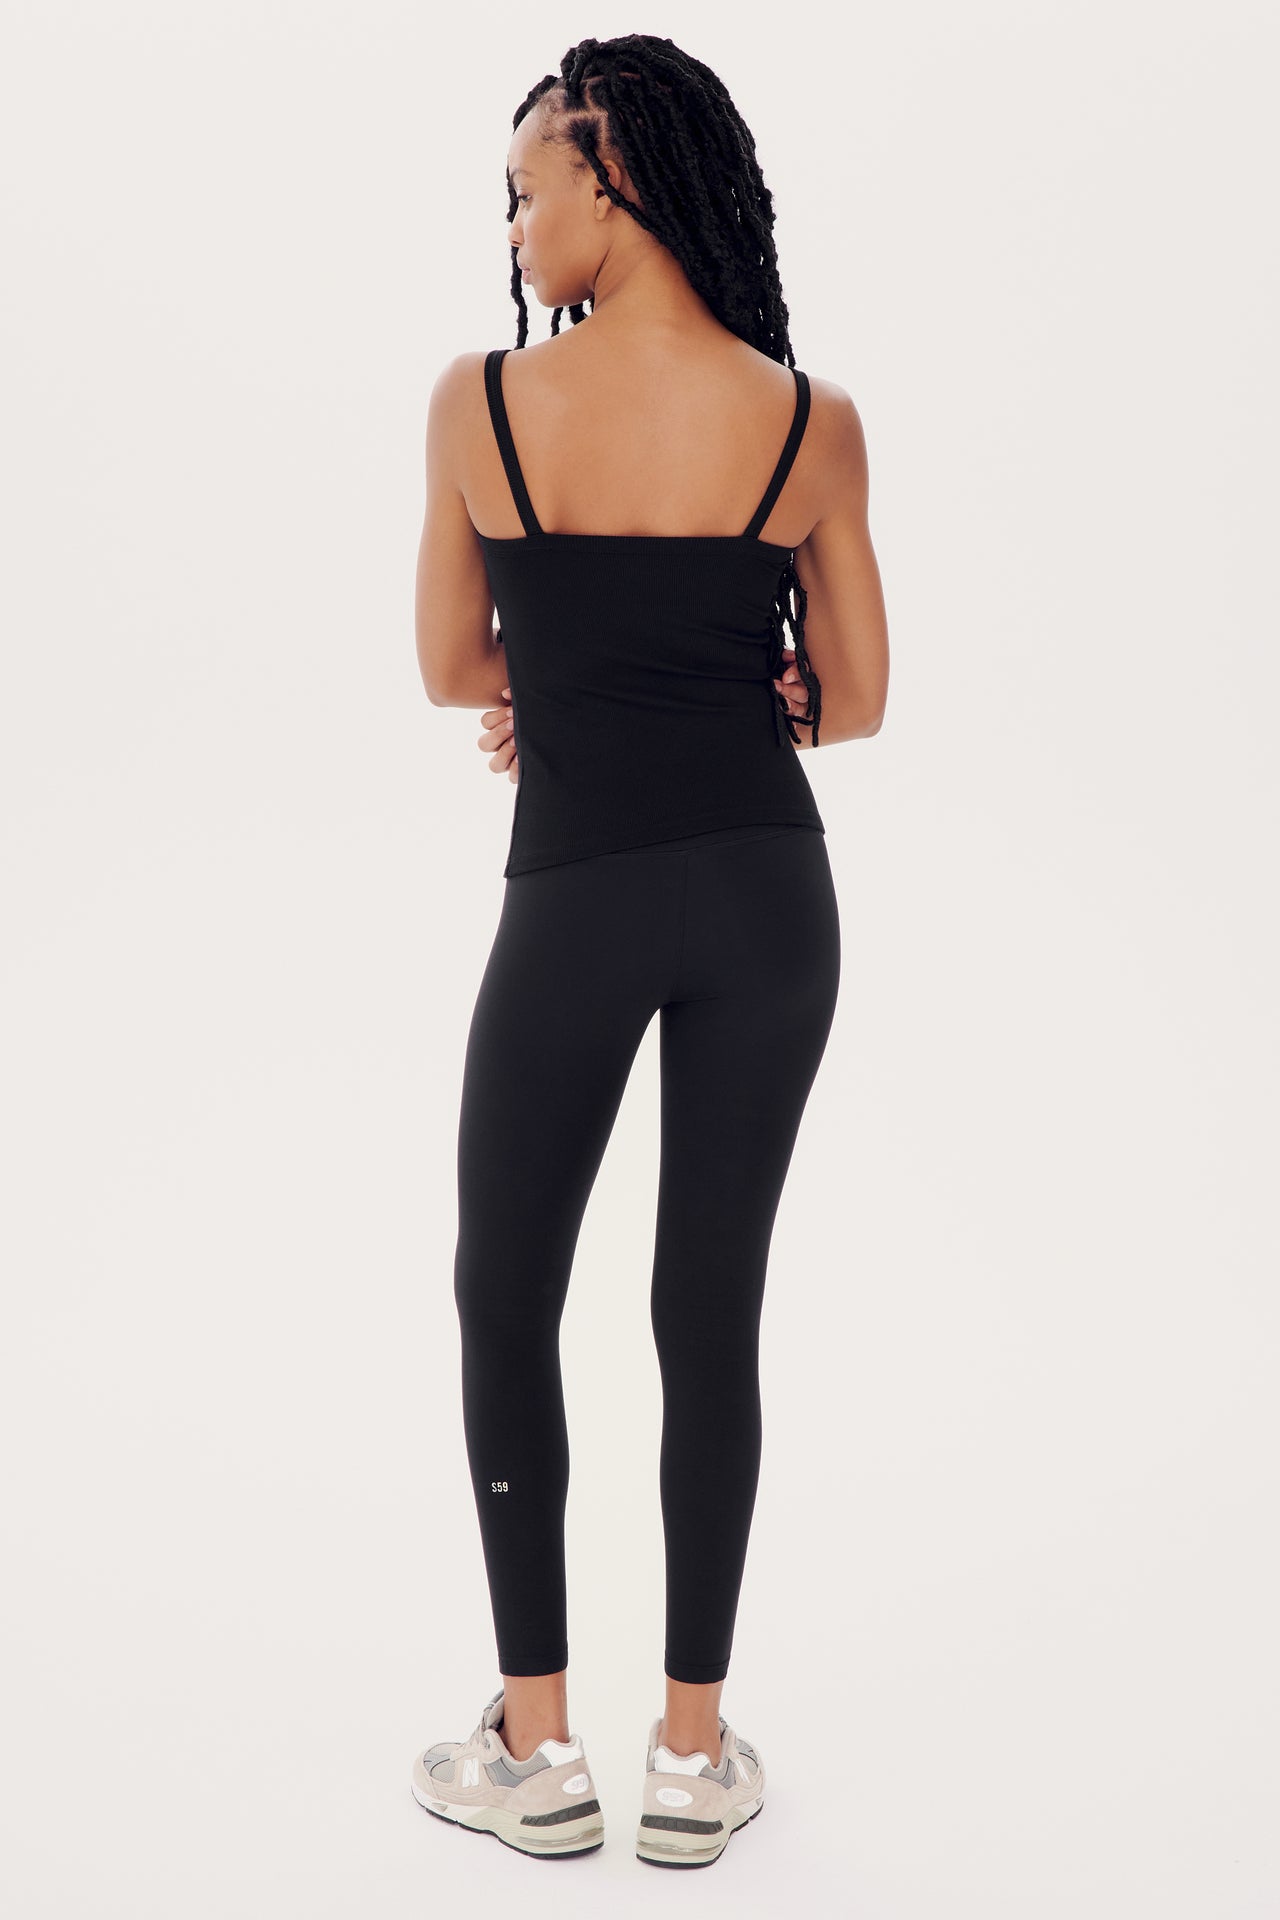 A woman standing with her back to the camera, wearing black leggings and a SPLITS59 Romy Rib Tank - Black, looking to the left, against a white background.